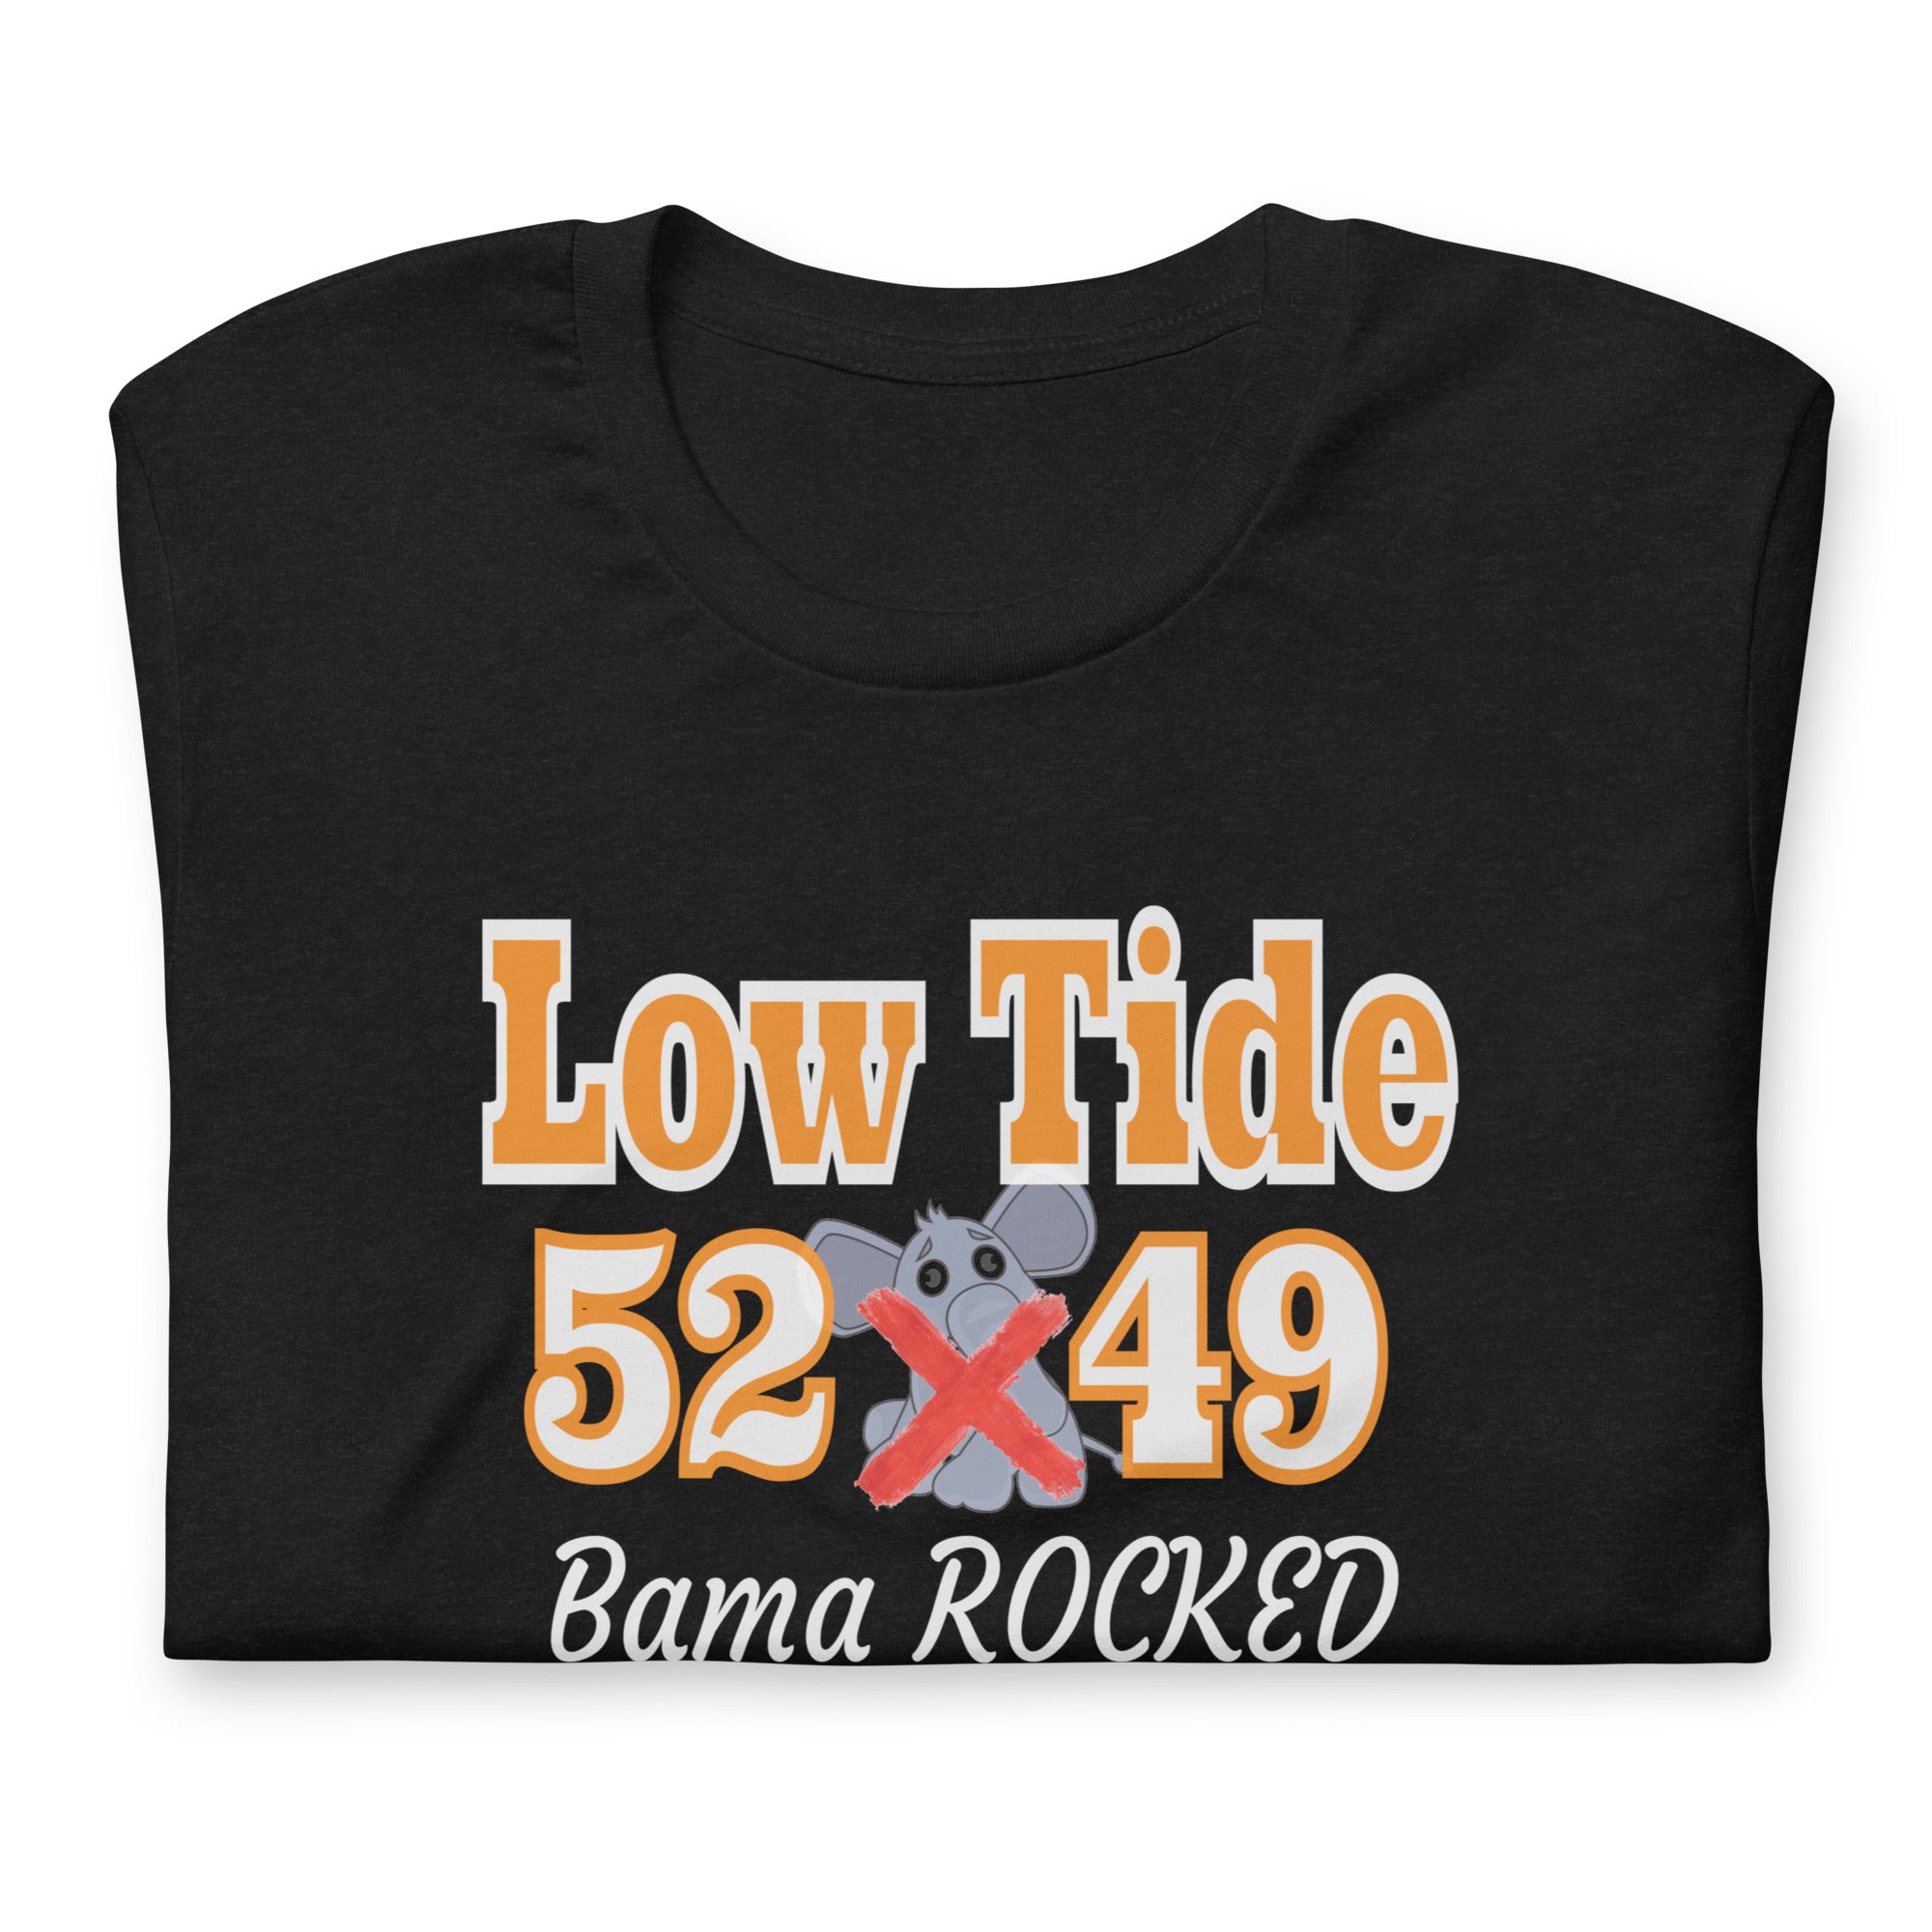 Tennessee Fans Victory over Alabama 52-49 Score Shirt